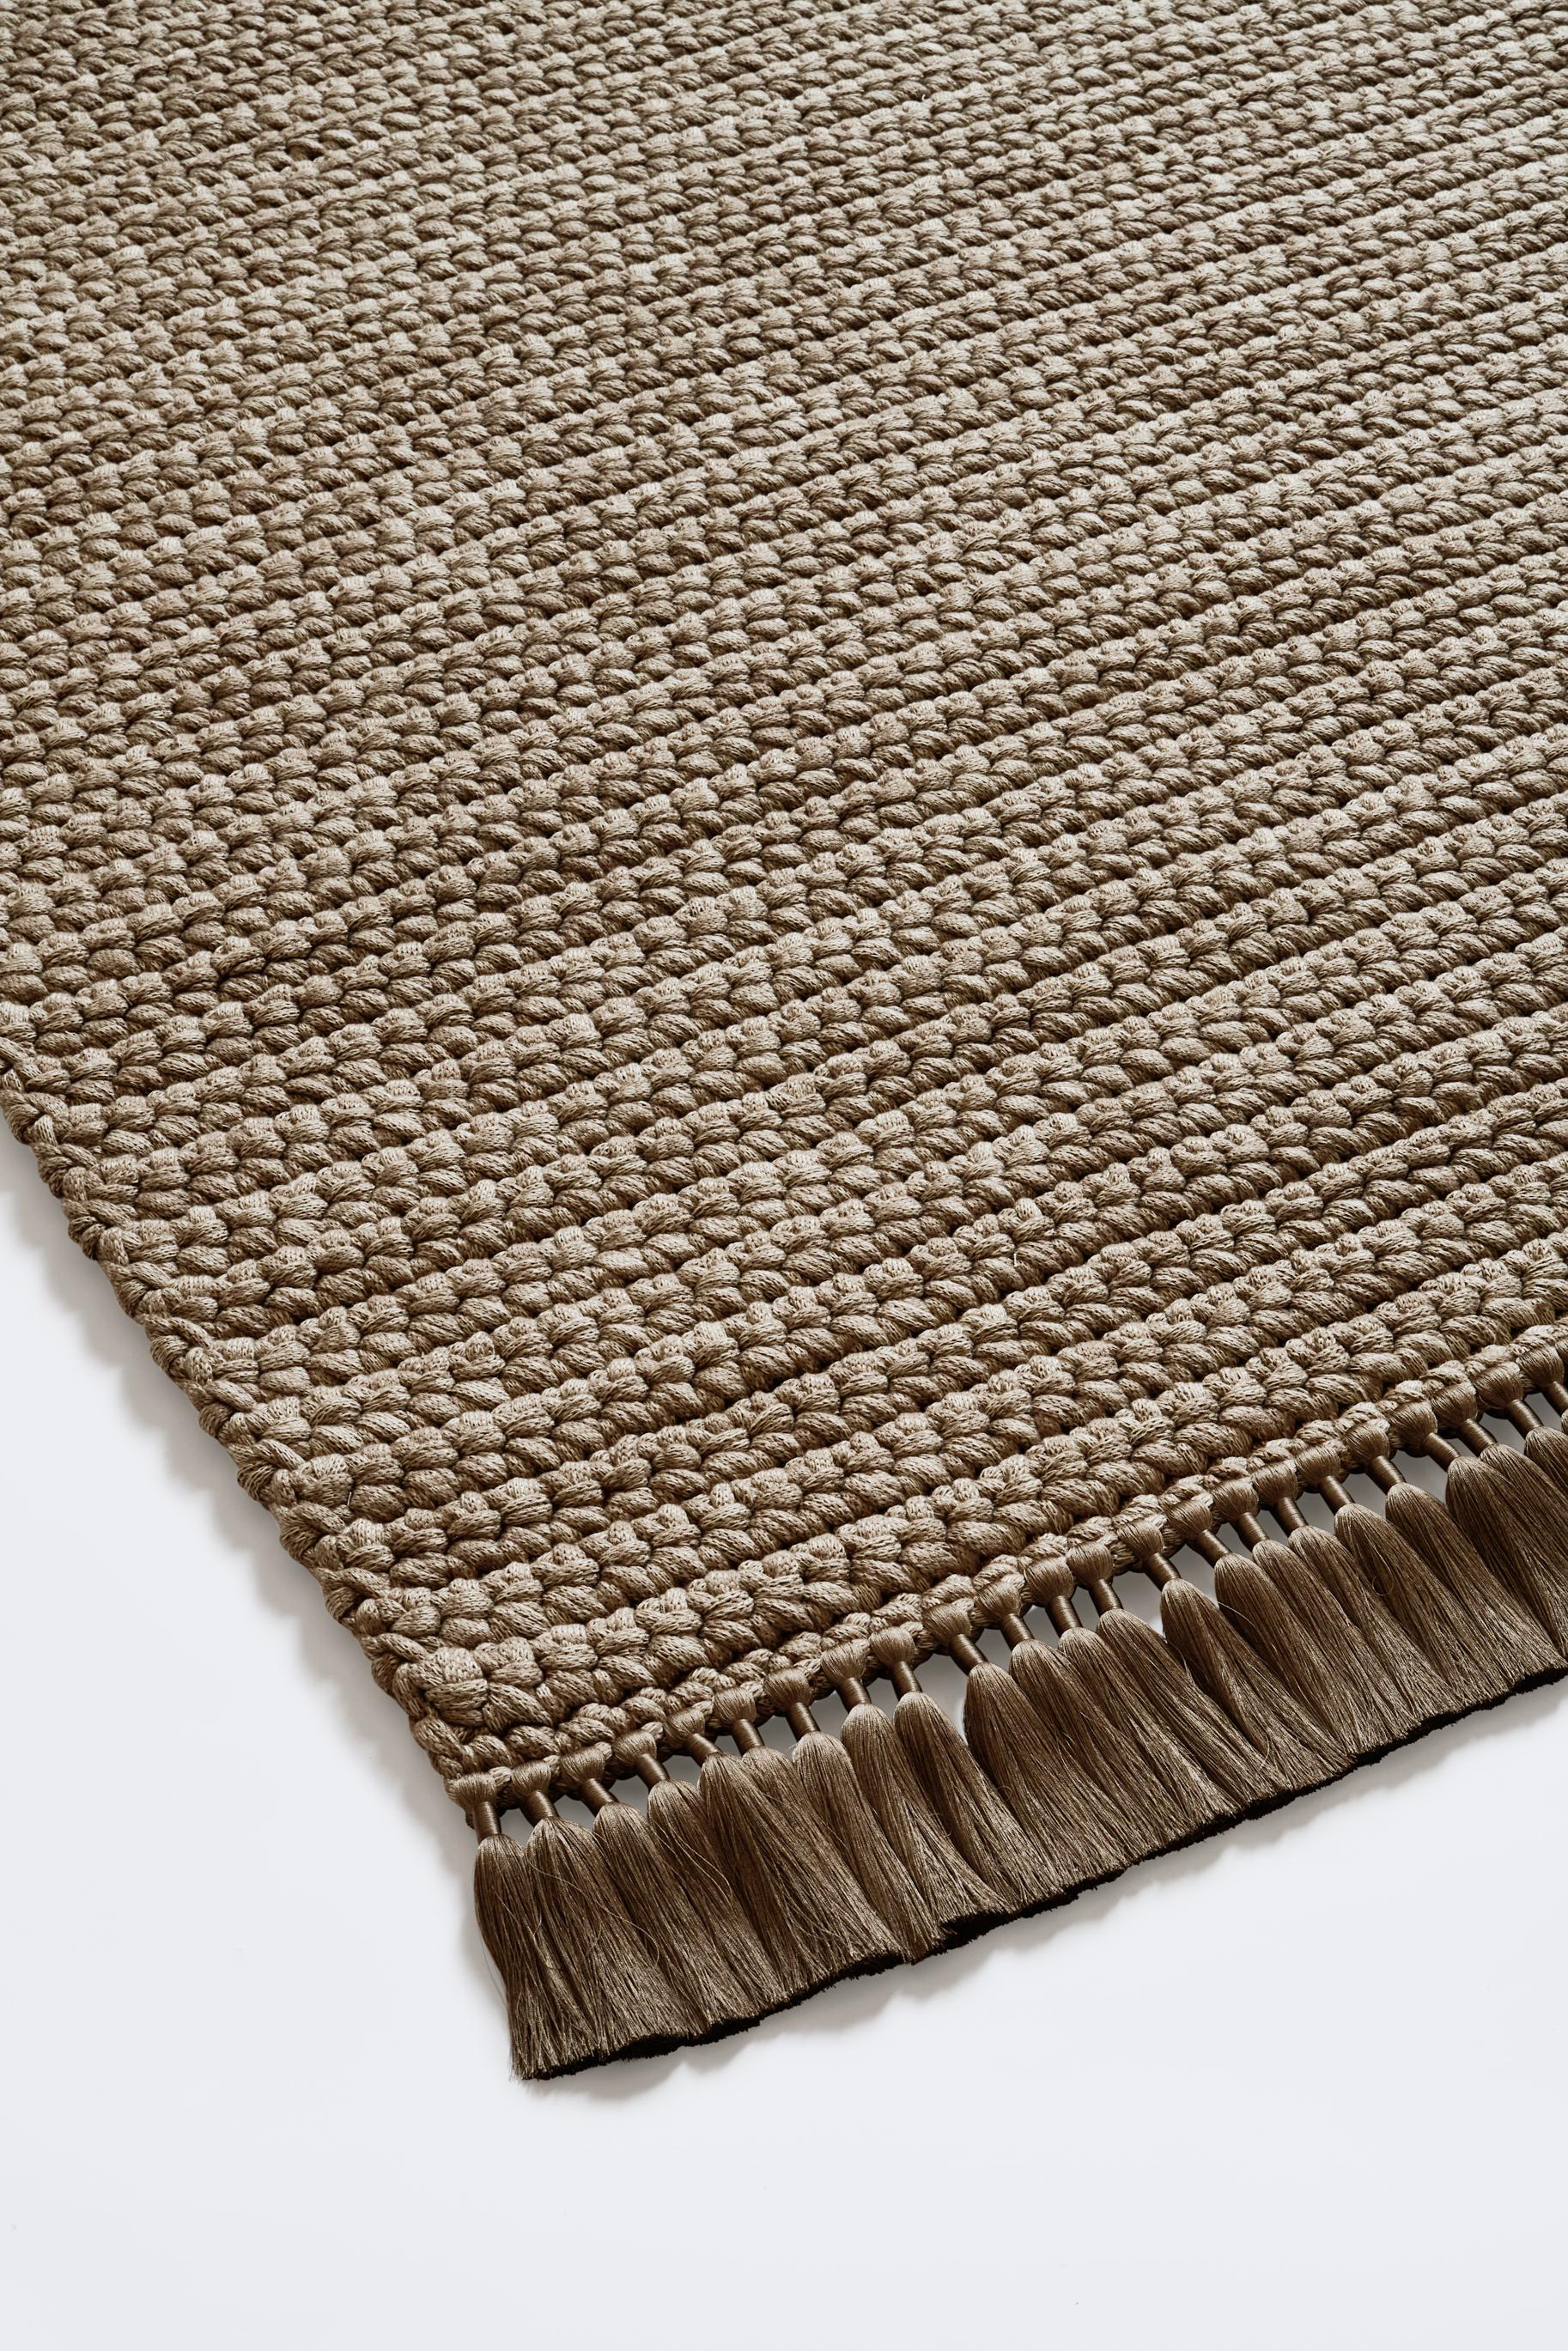 Handmade Crochet Thick Rug 170x240 cm in Cacao Brown Beige Colors In New Condition For Sale In Tel Aviv, IL